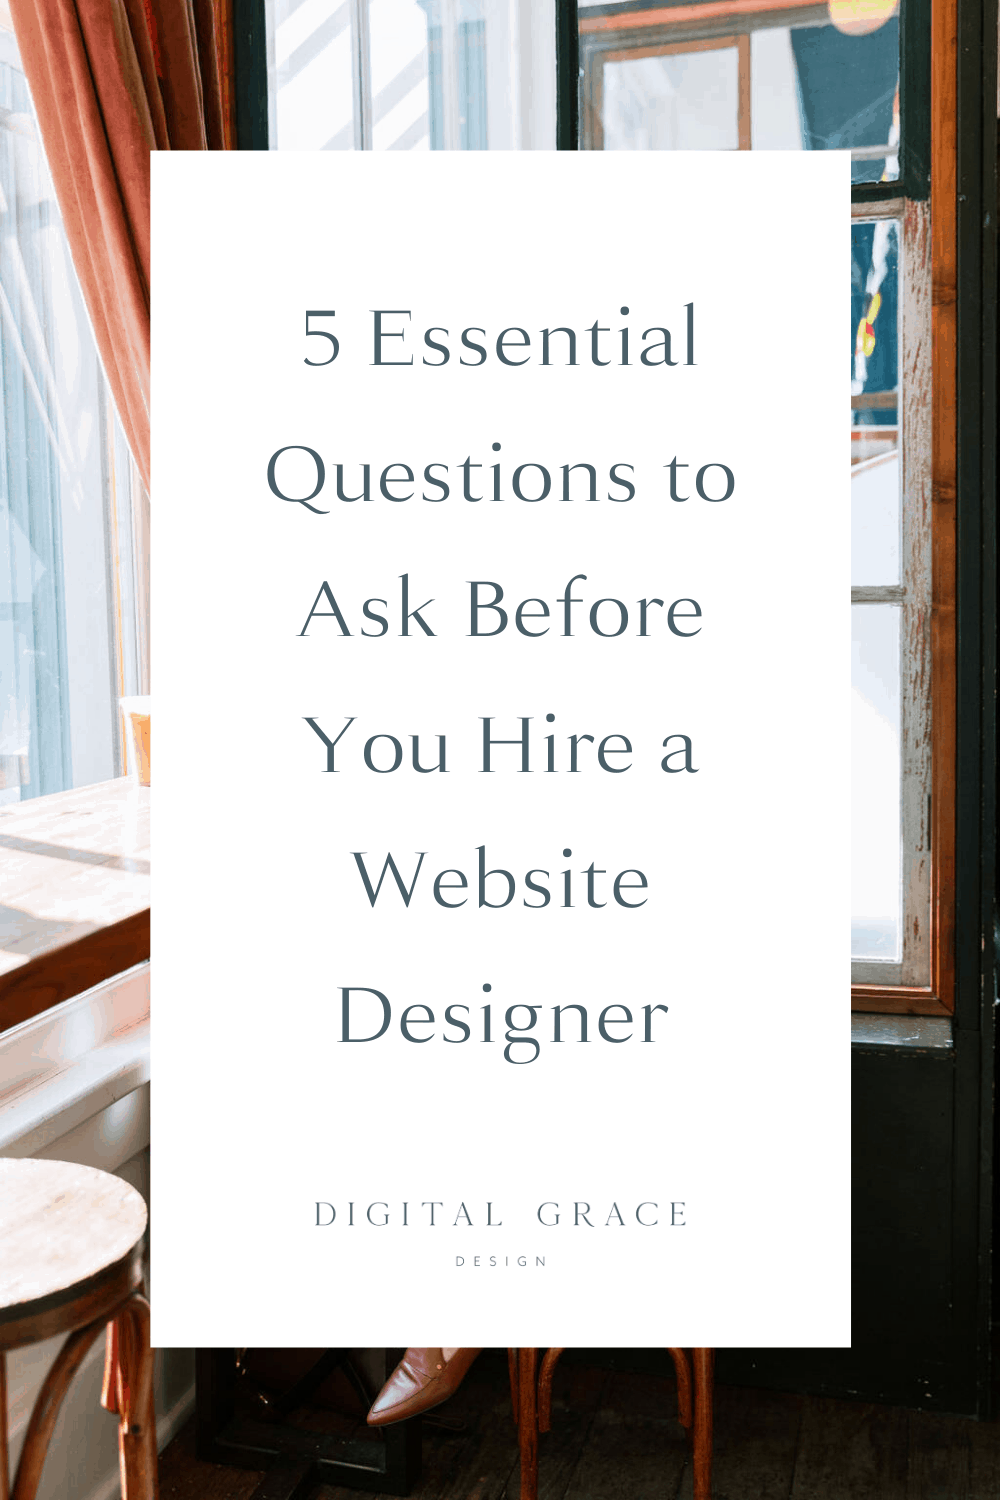 5 Essential Questions to Ask Before You Hire a Website Designer